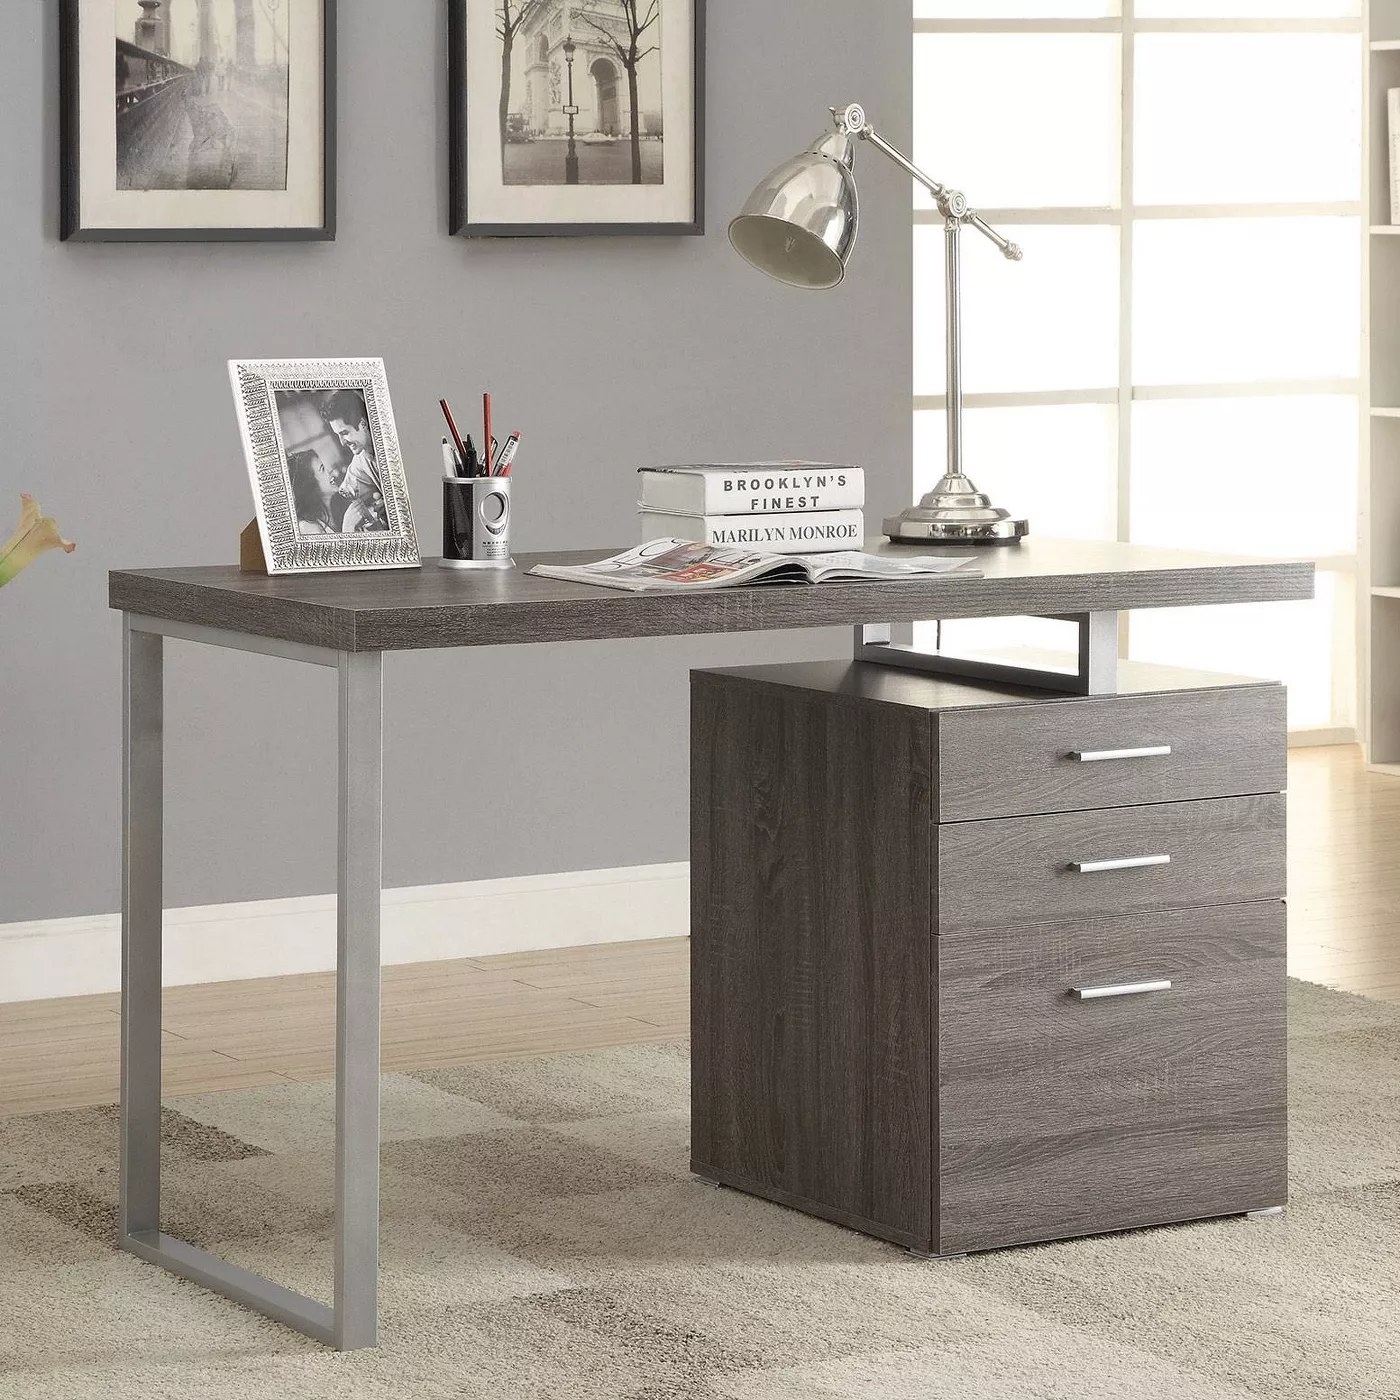 The weathered gray desk with a file cabinet